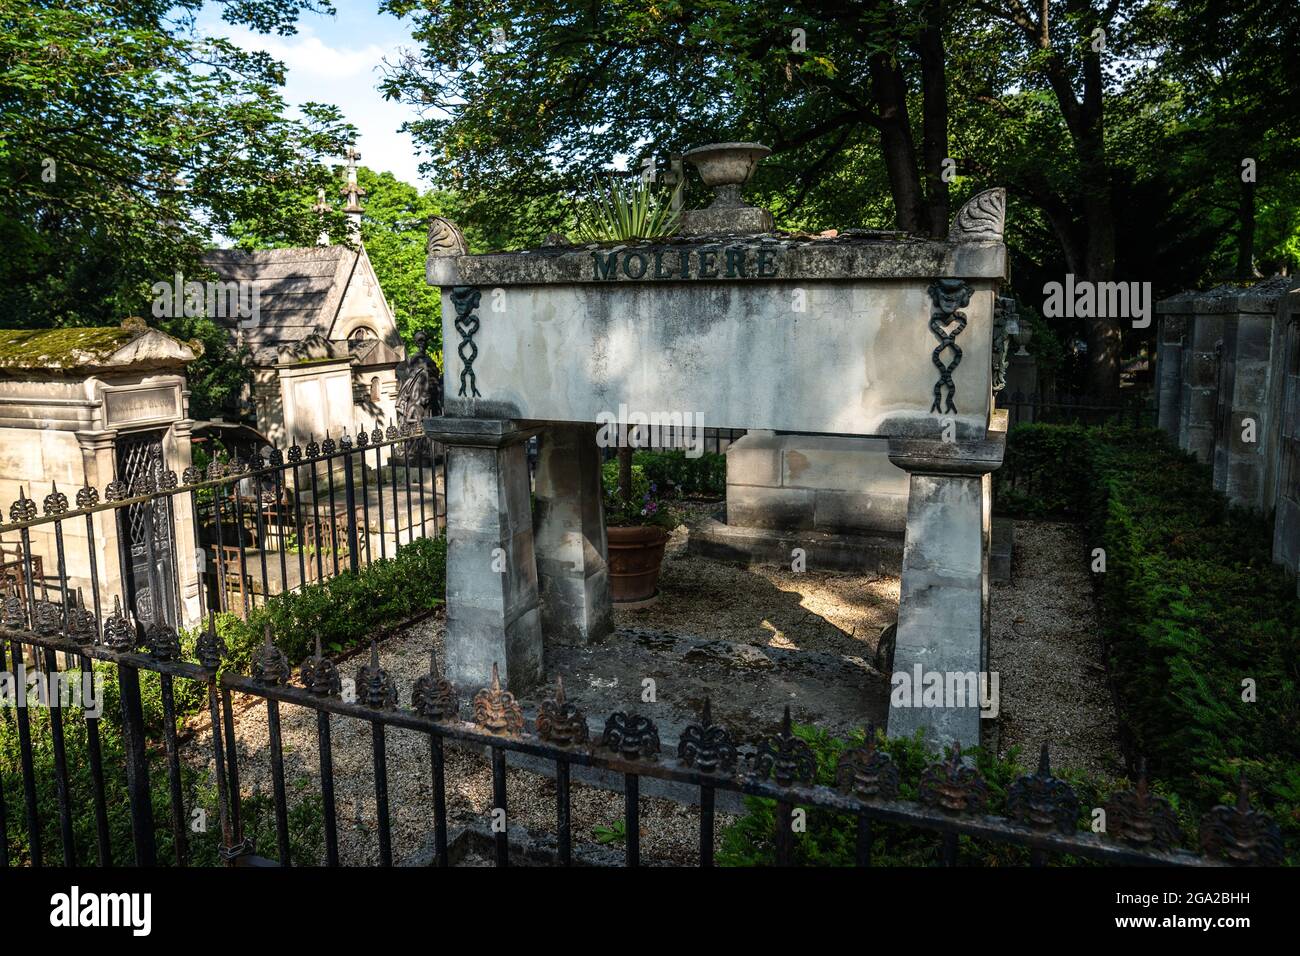 Moliere's grave at the Pere Lachaise Cemetery which is the largest cemetery in Paris, France. Stock Photo